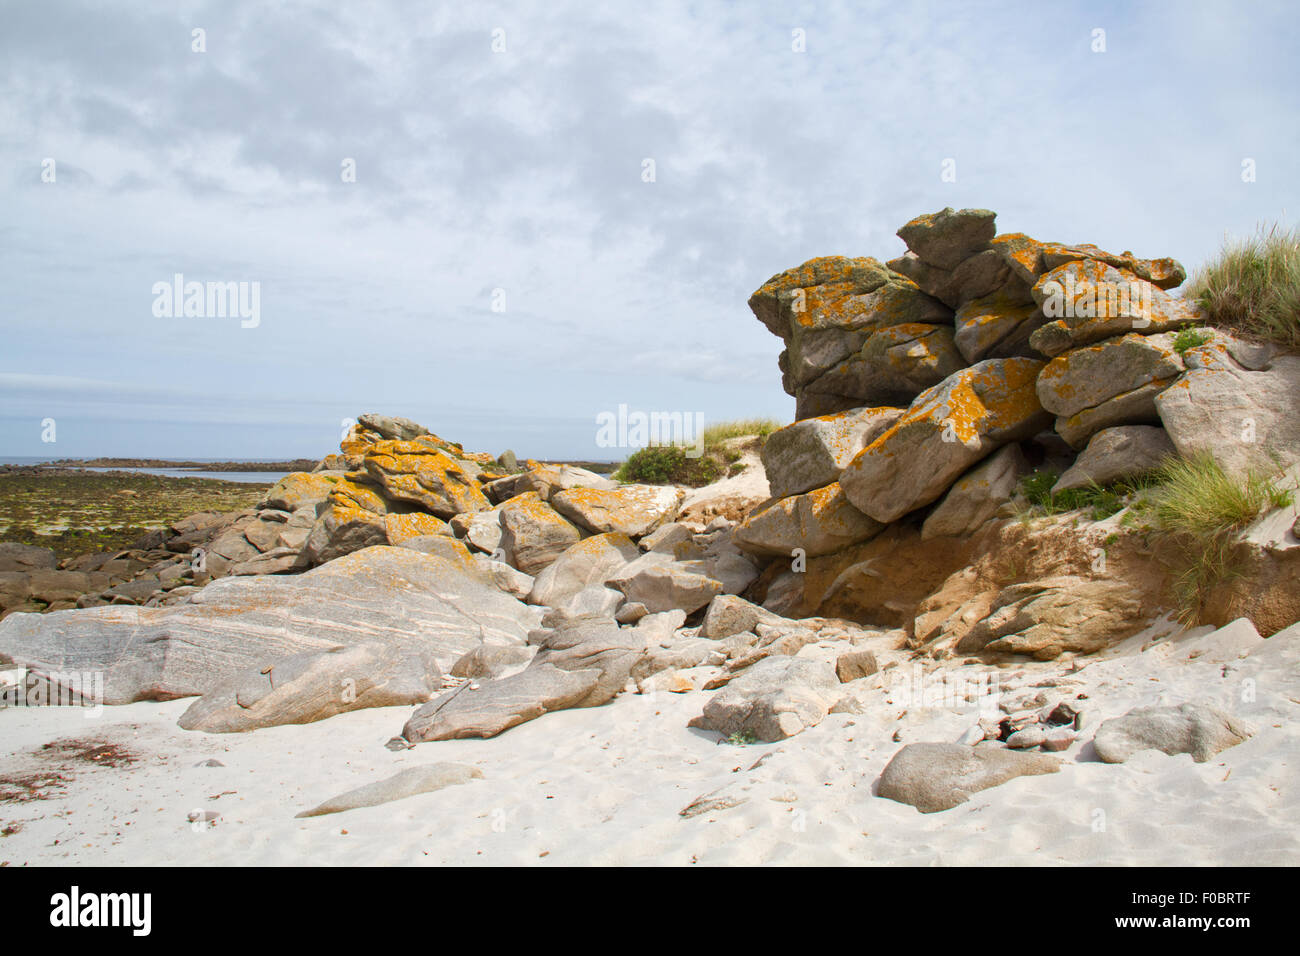 Eroded granite, a tor, also known as castle koppie or kopje, on the coast of Brittany, France Stock Photo